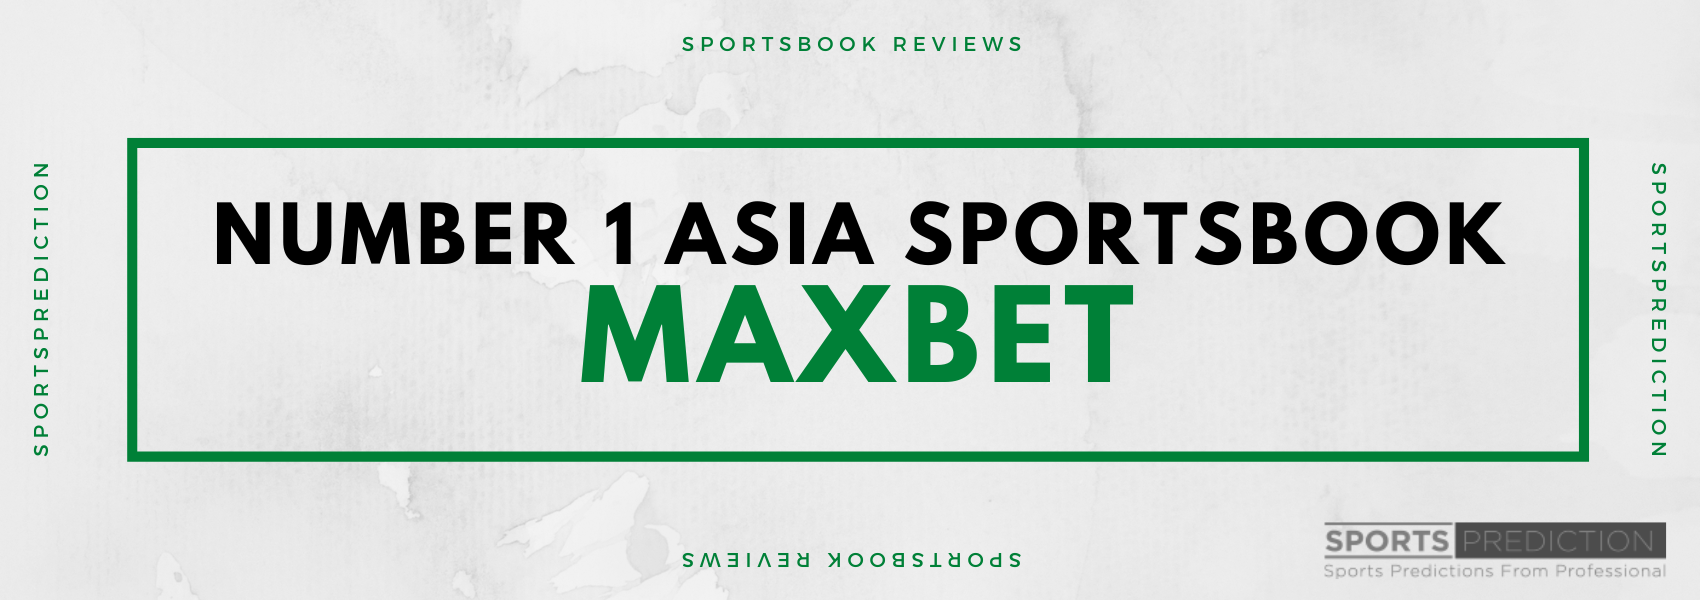 Number 1 Asia Sportsbook - Maxbet